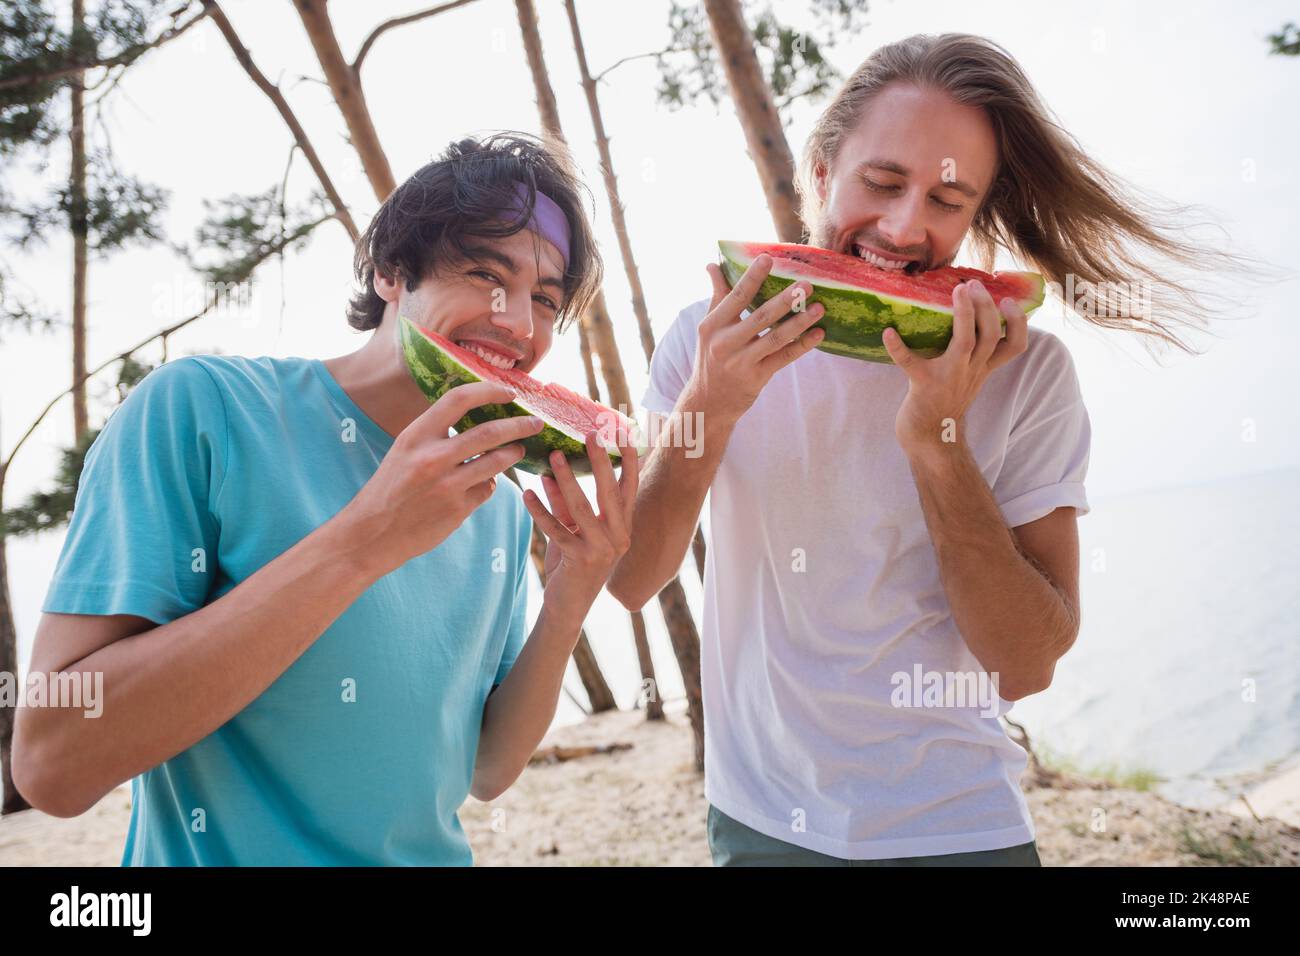 Photo of enjoy guys eat watermelon wear casual cloth outdoors on the river near trees Stock Photo